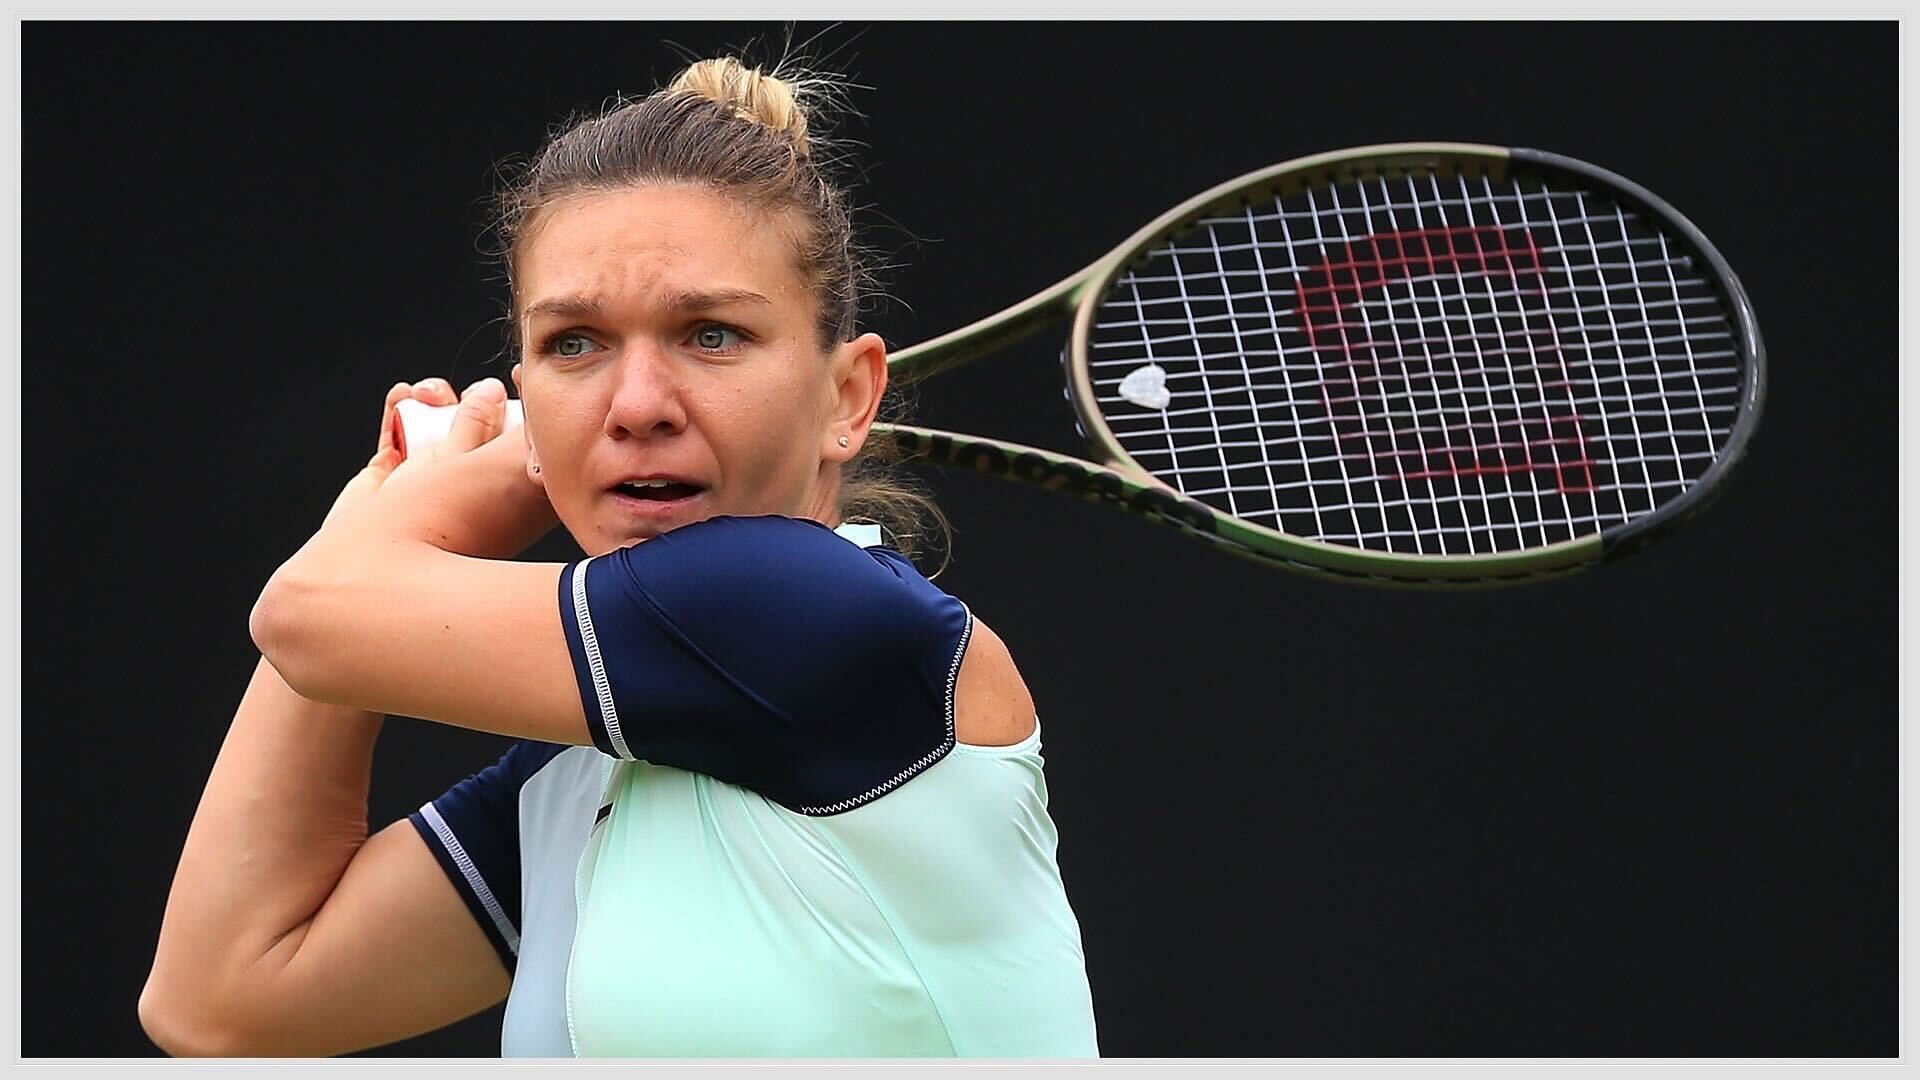 Tennis fans rally behind Simona Halep as she shares helplessness over second doping charge